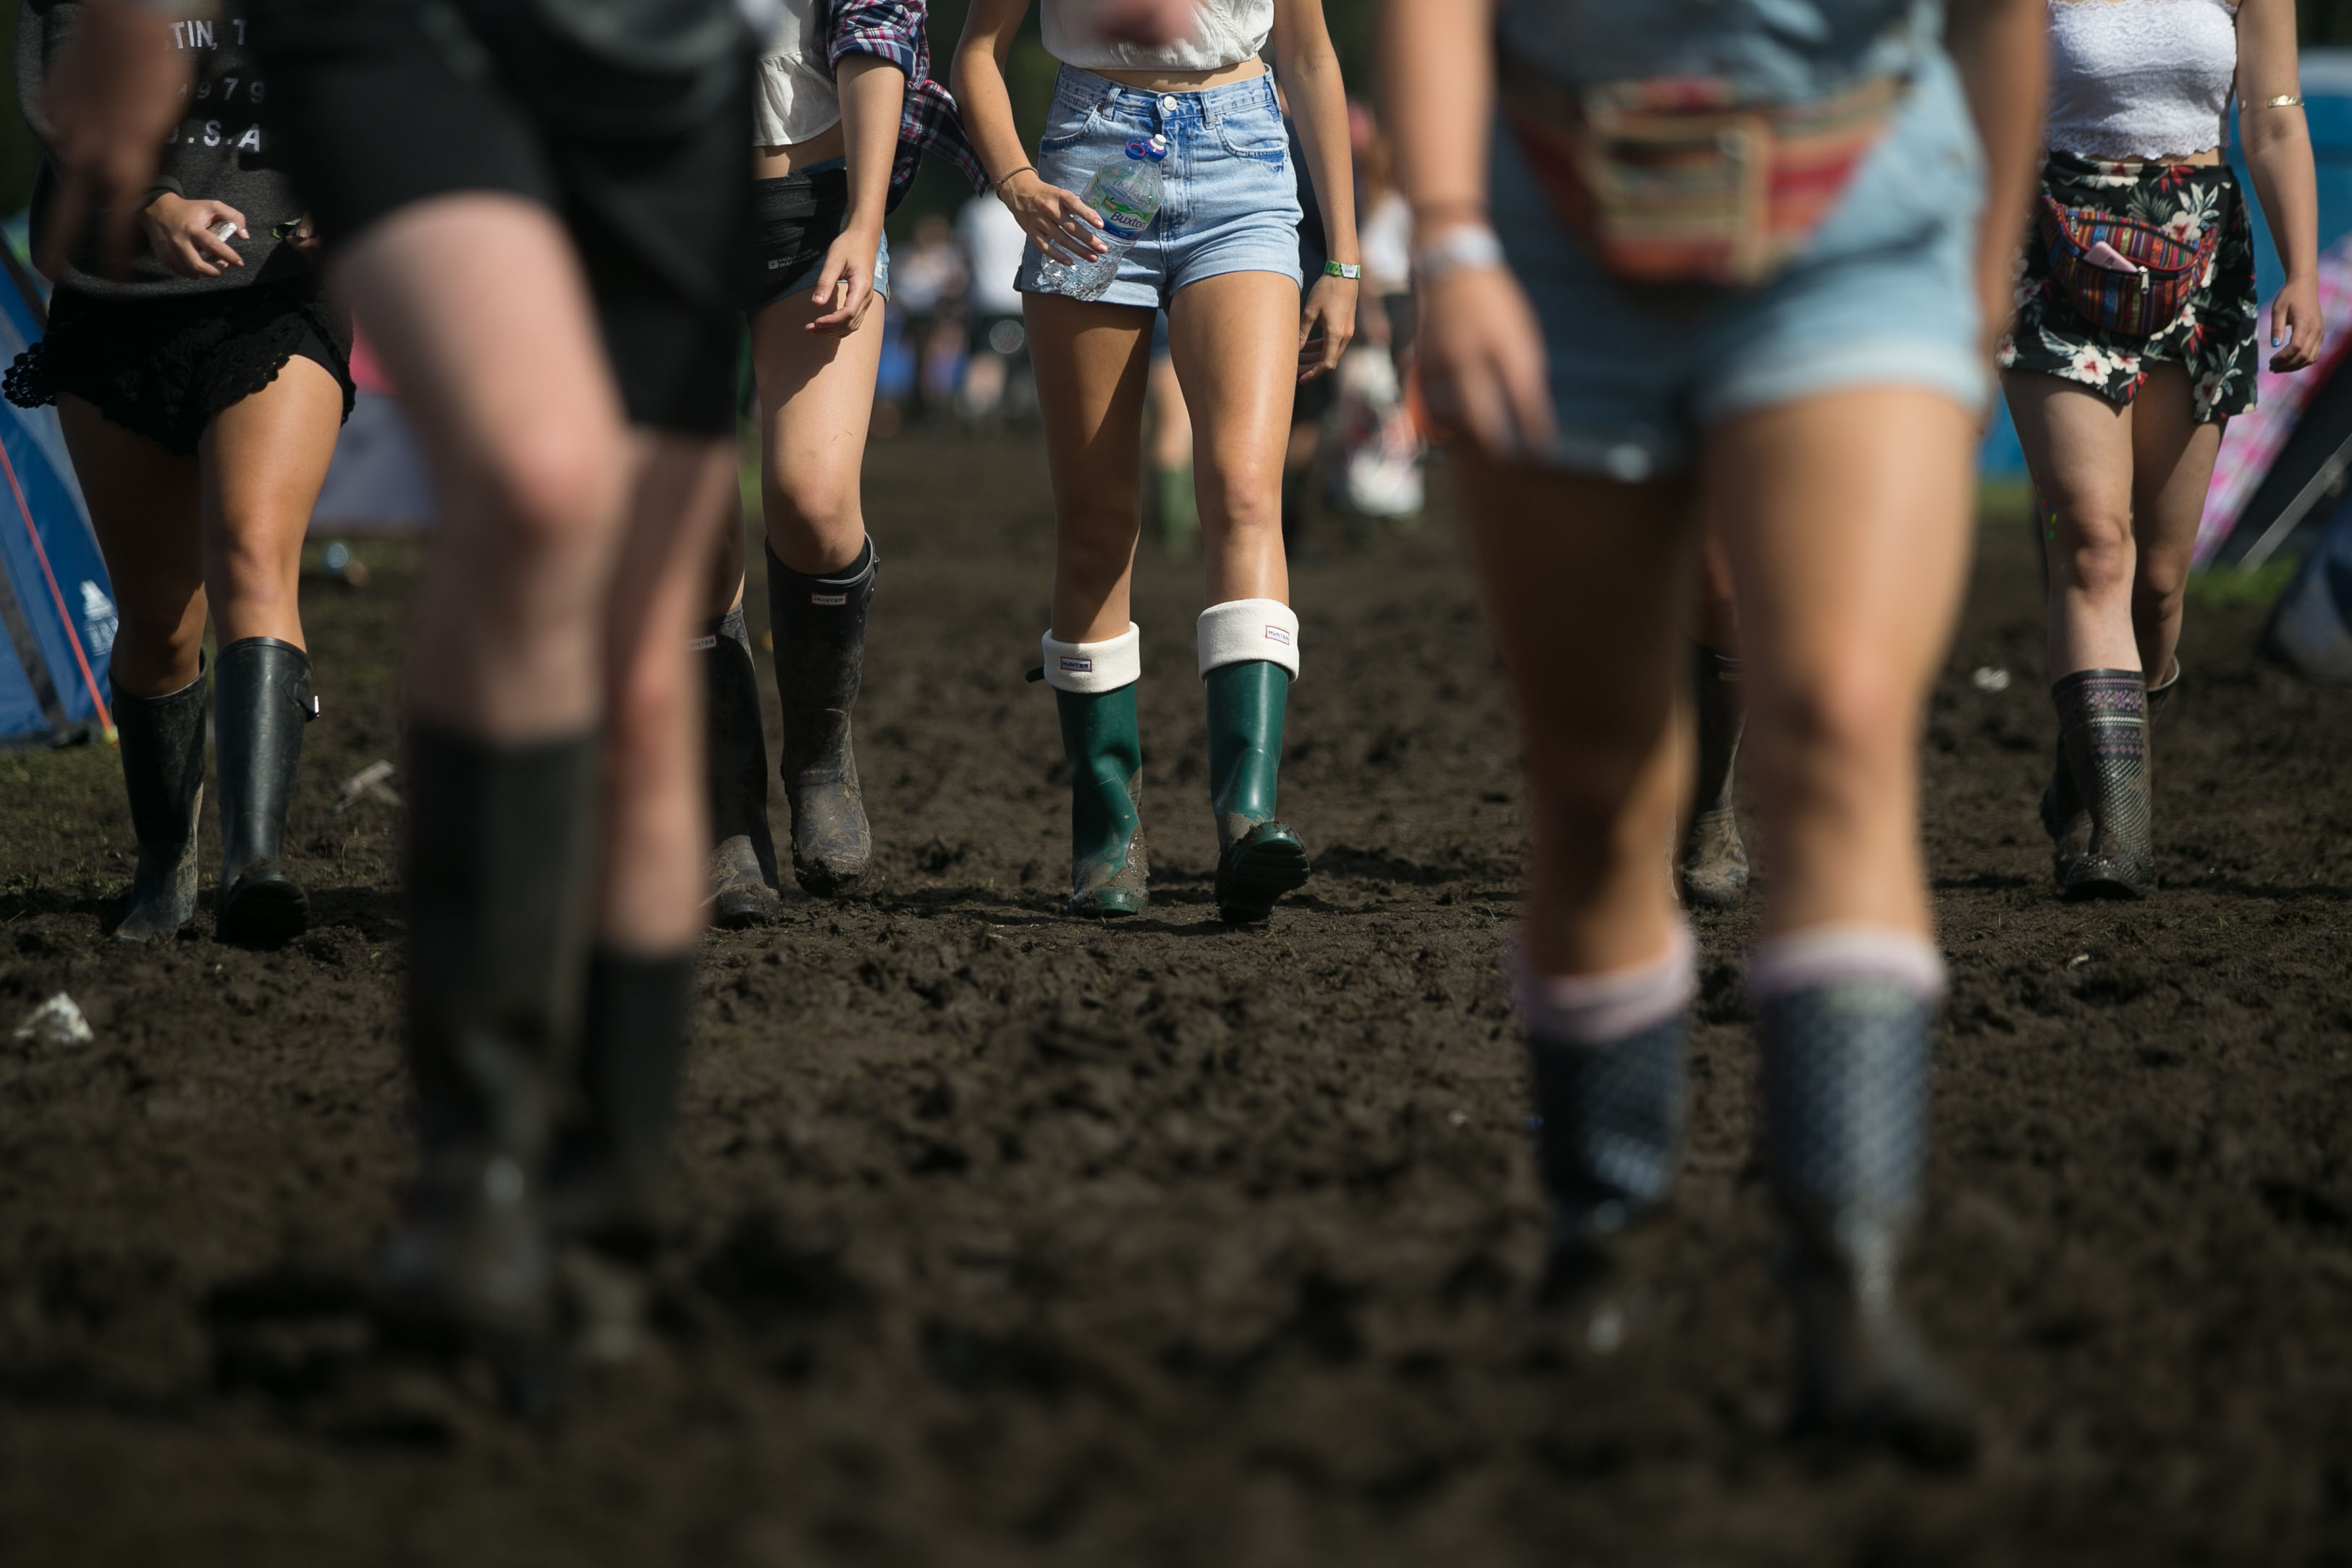 Festival goers walking in the mud on the first day of the Reading Festival in Berkshire.